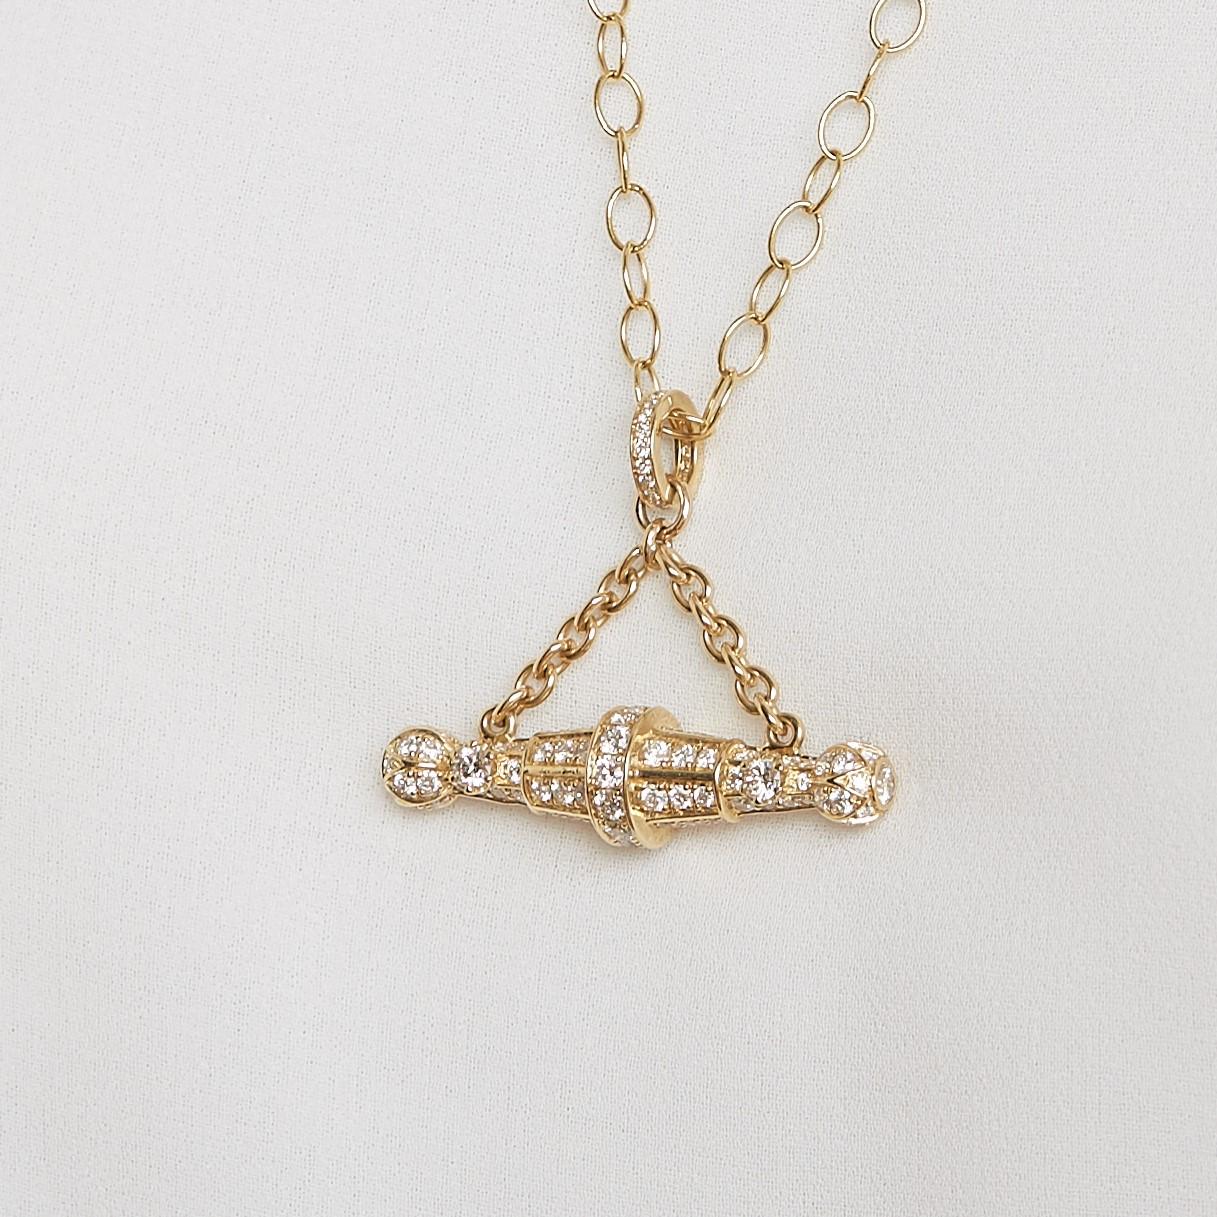 Created in 18kyg
Diamonds 3 cts approx
Chain sold separately
Limited Edition

Handcrafted from precious 18-karat yellow gold and set with approximately 3 carats of dazzling diamonds, this exclusive Limited Edition pendant leaves a lasting